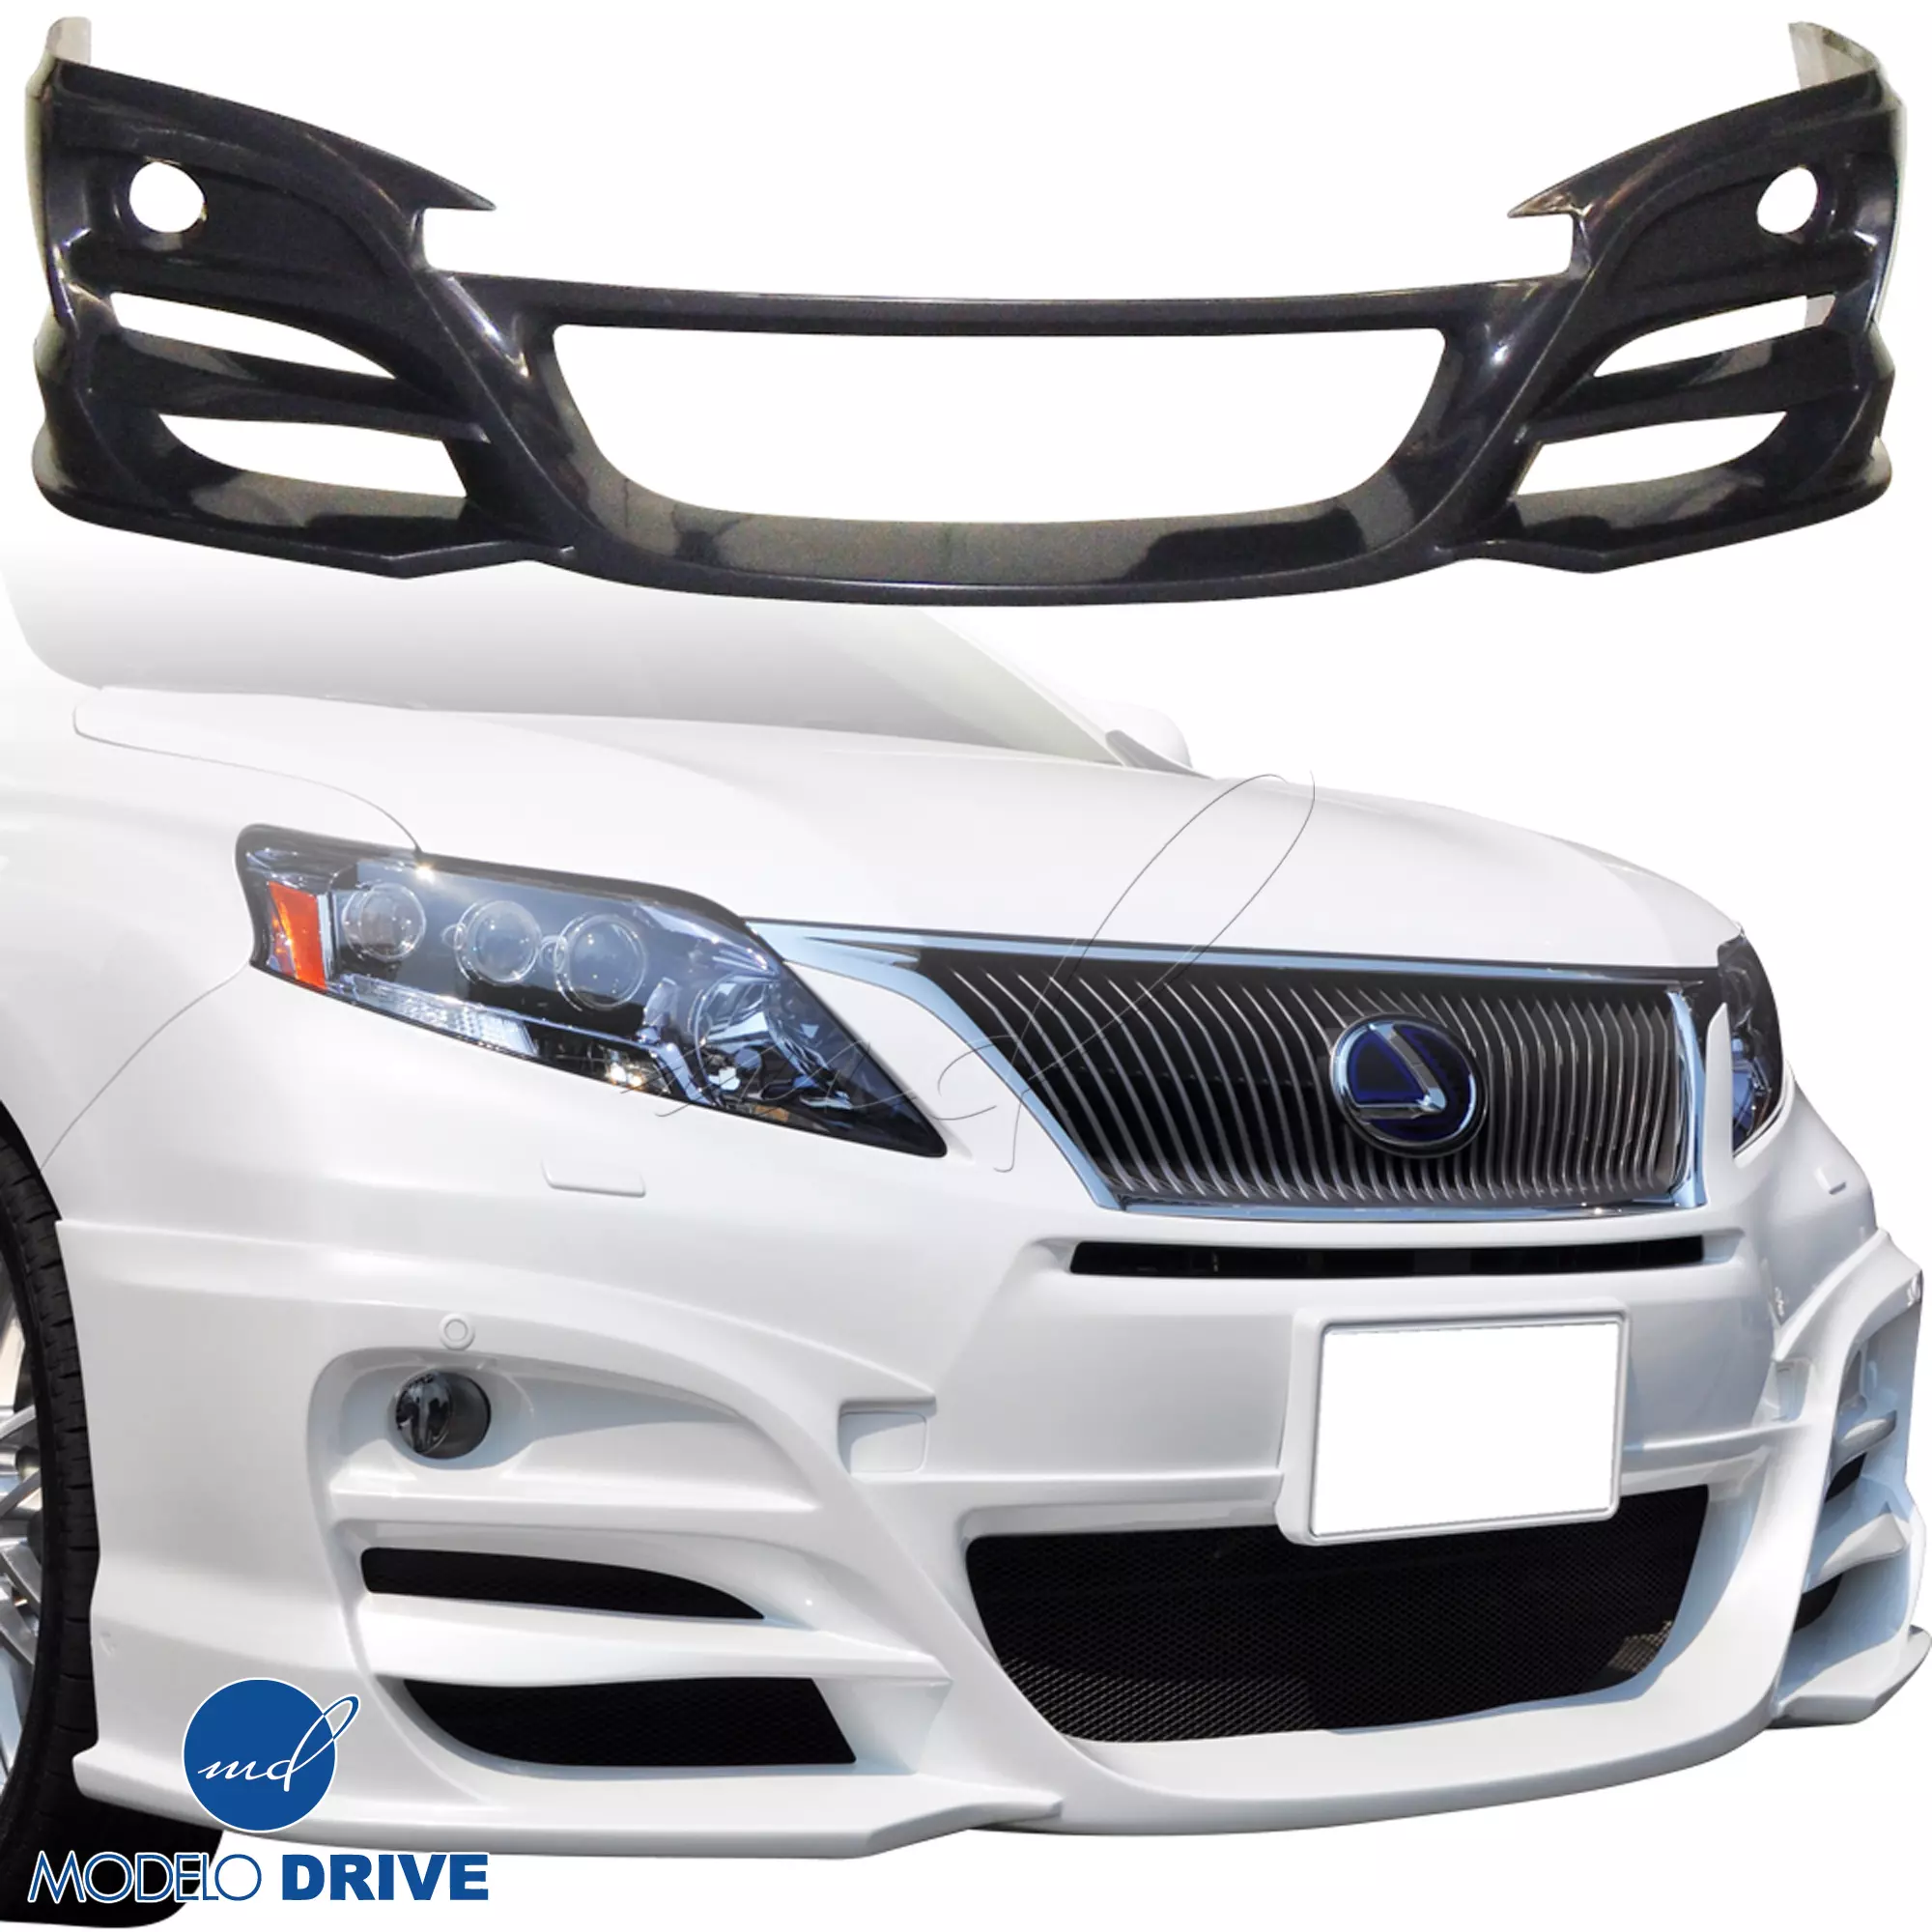 ModeloDrive FRP WAL BISO Front Add-on Valance > Lexus RX-Series RX350 RX450 2010-2012 - Image 1